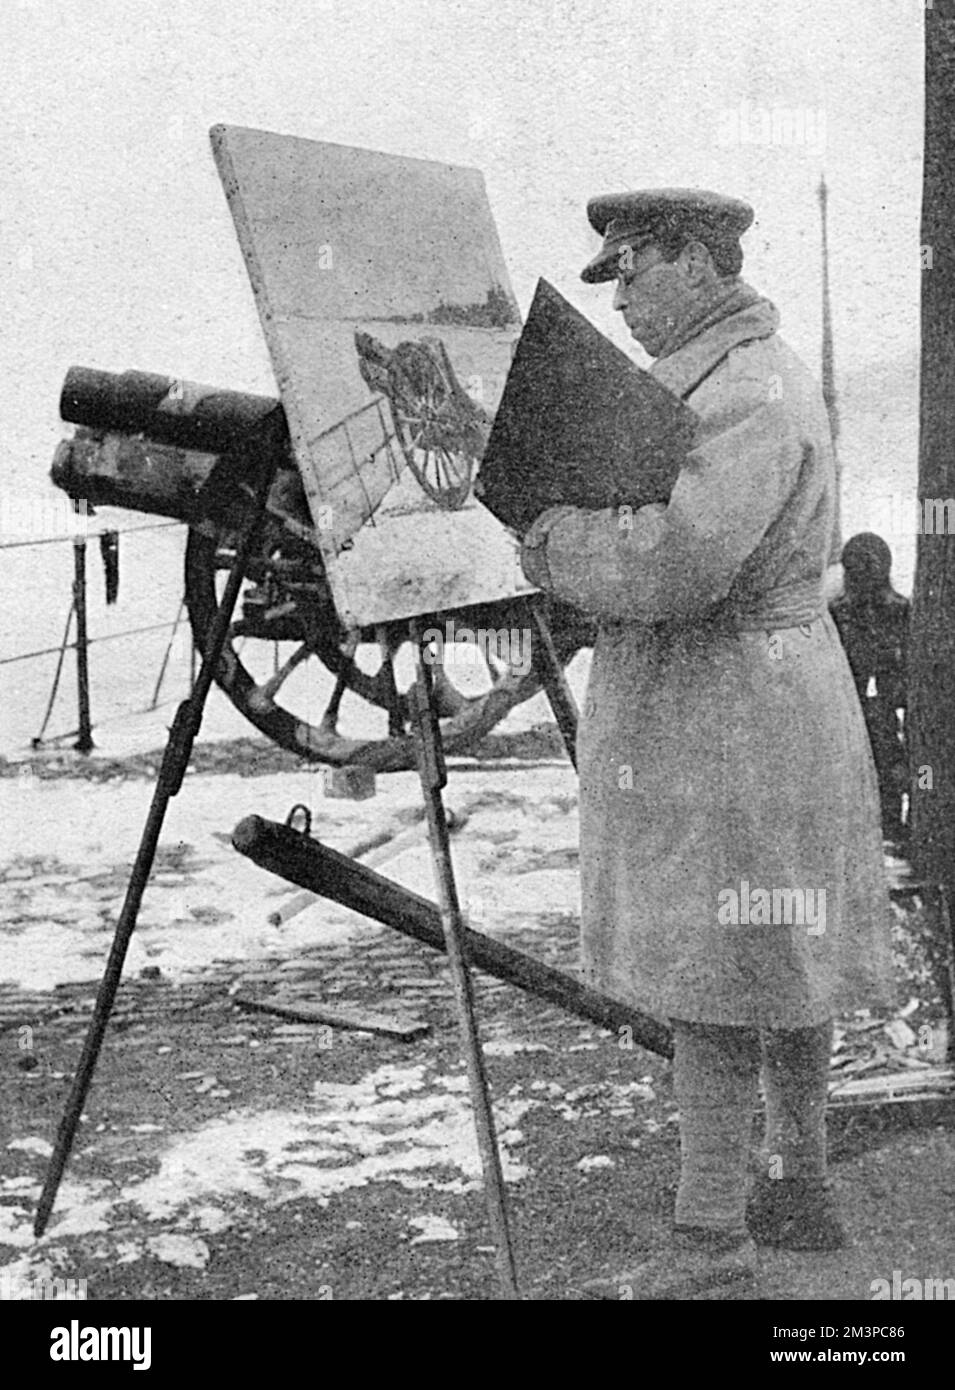 Sir William Rothenstein, one of the official artists of the Canadian War Records travelled with the Canadians to record their time occupying the Rhineland after the end of the First World War.  Pictured here at his easel painting a war scene.       Date: 1919 Stock Photo